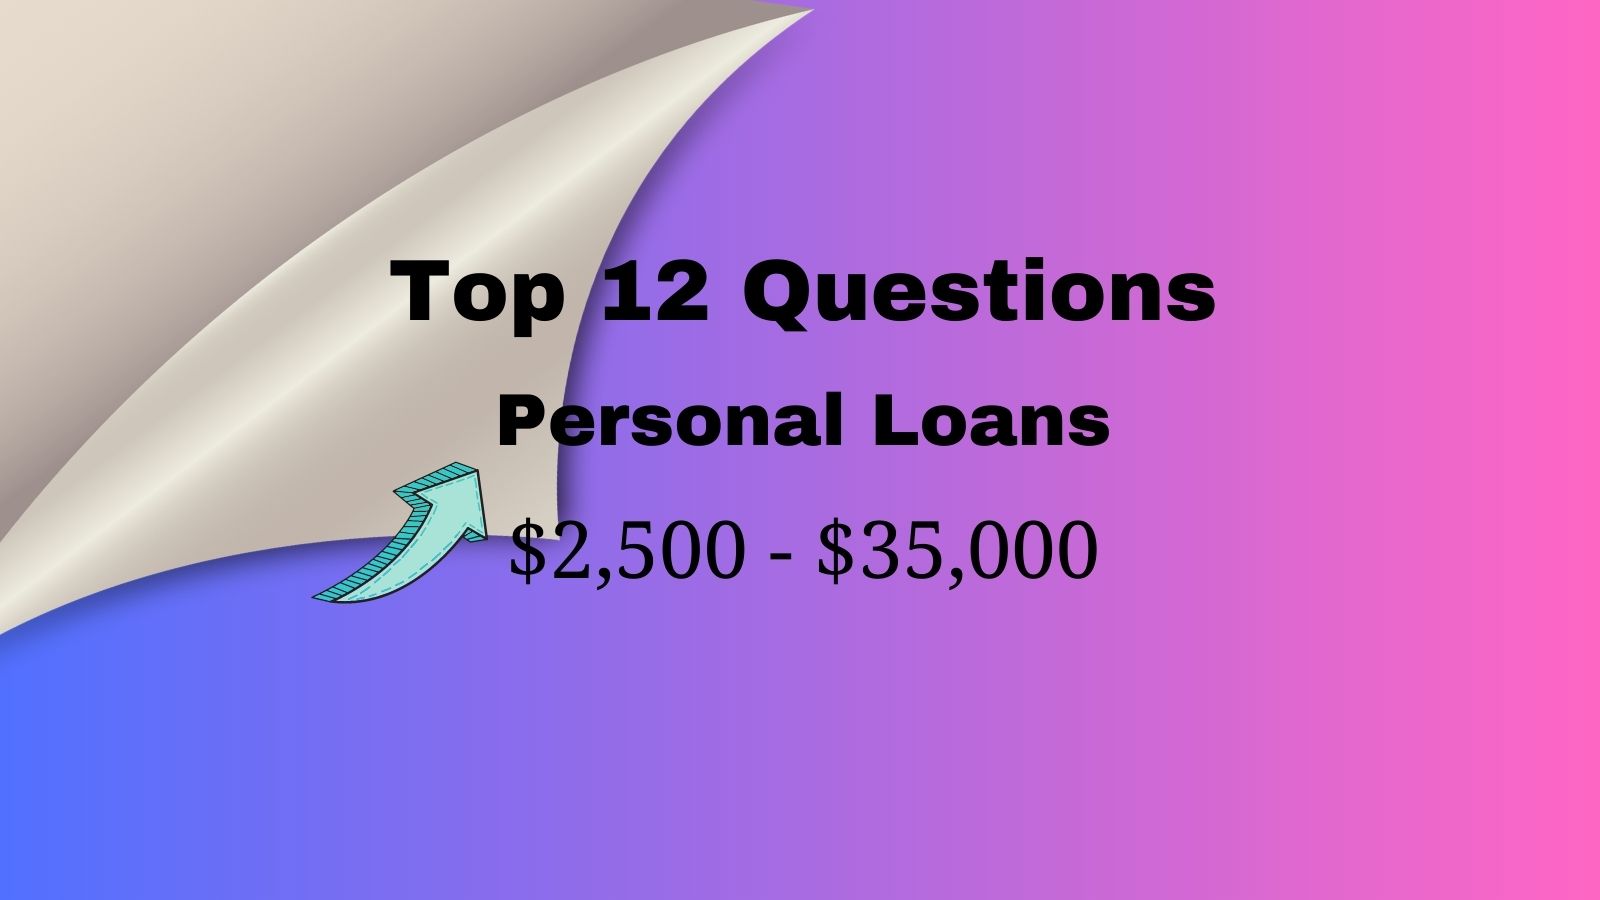 Top-12-questions-personal-Loans-2500-35000